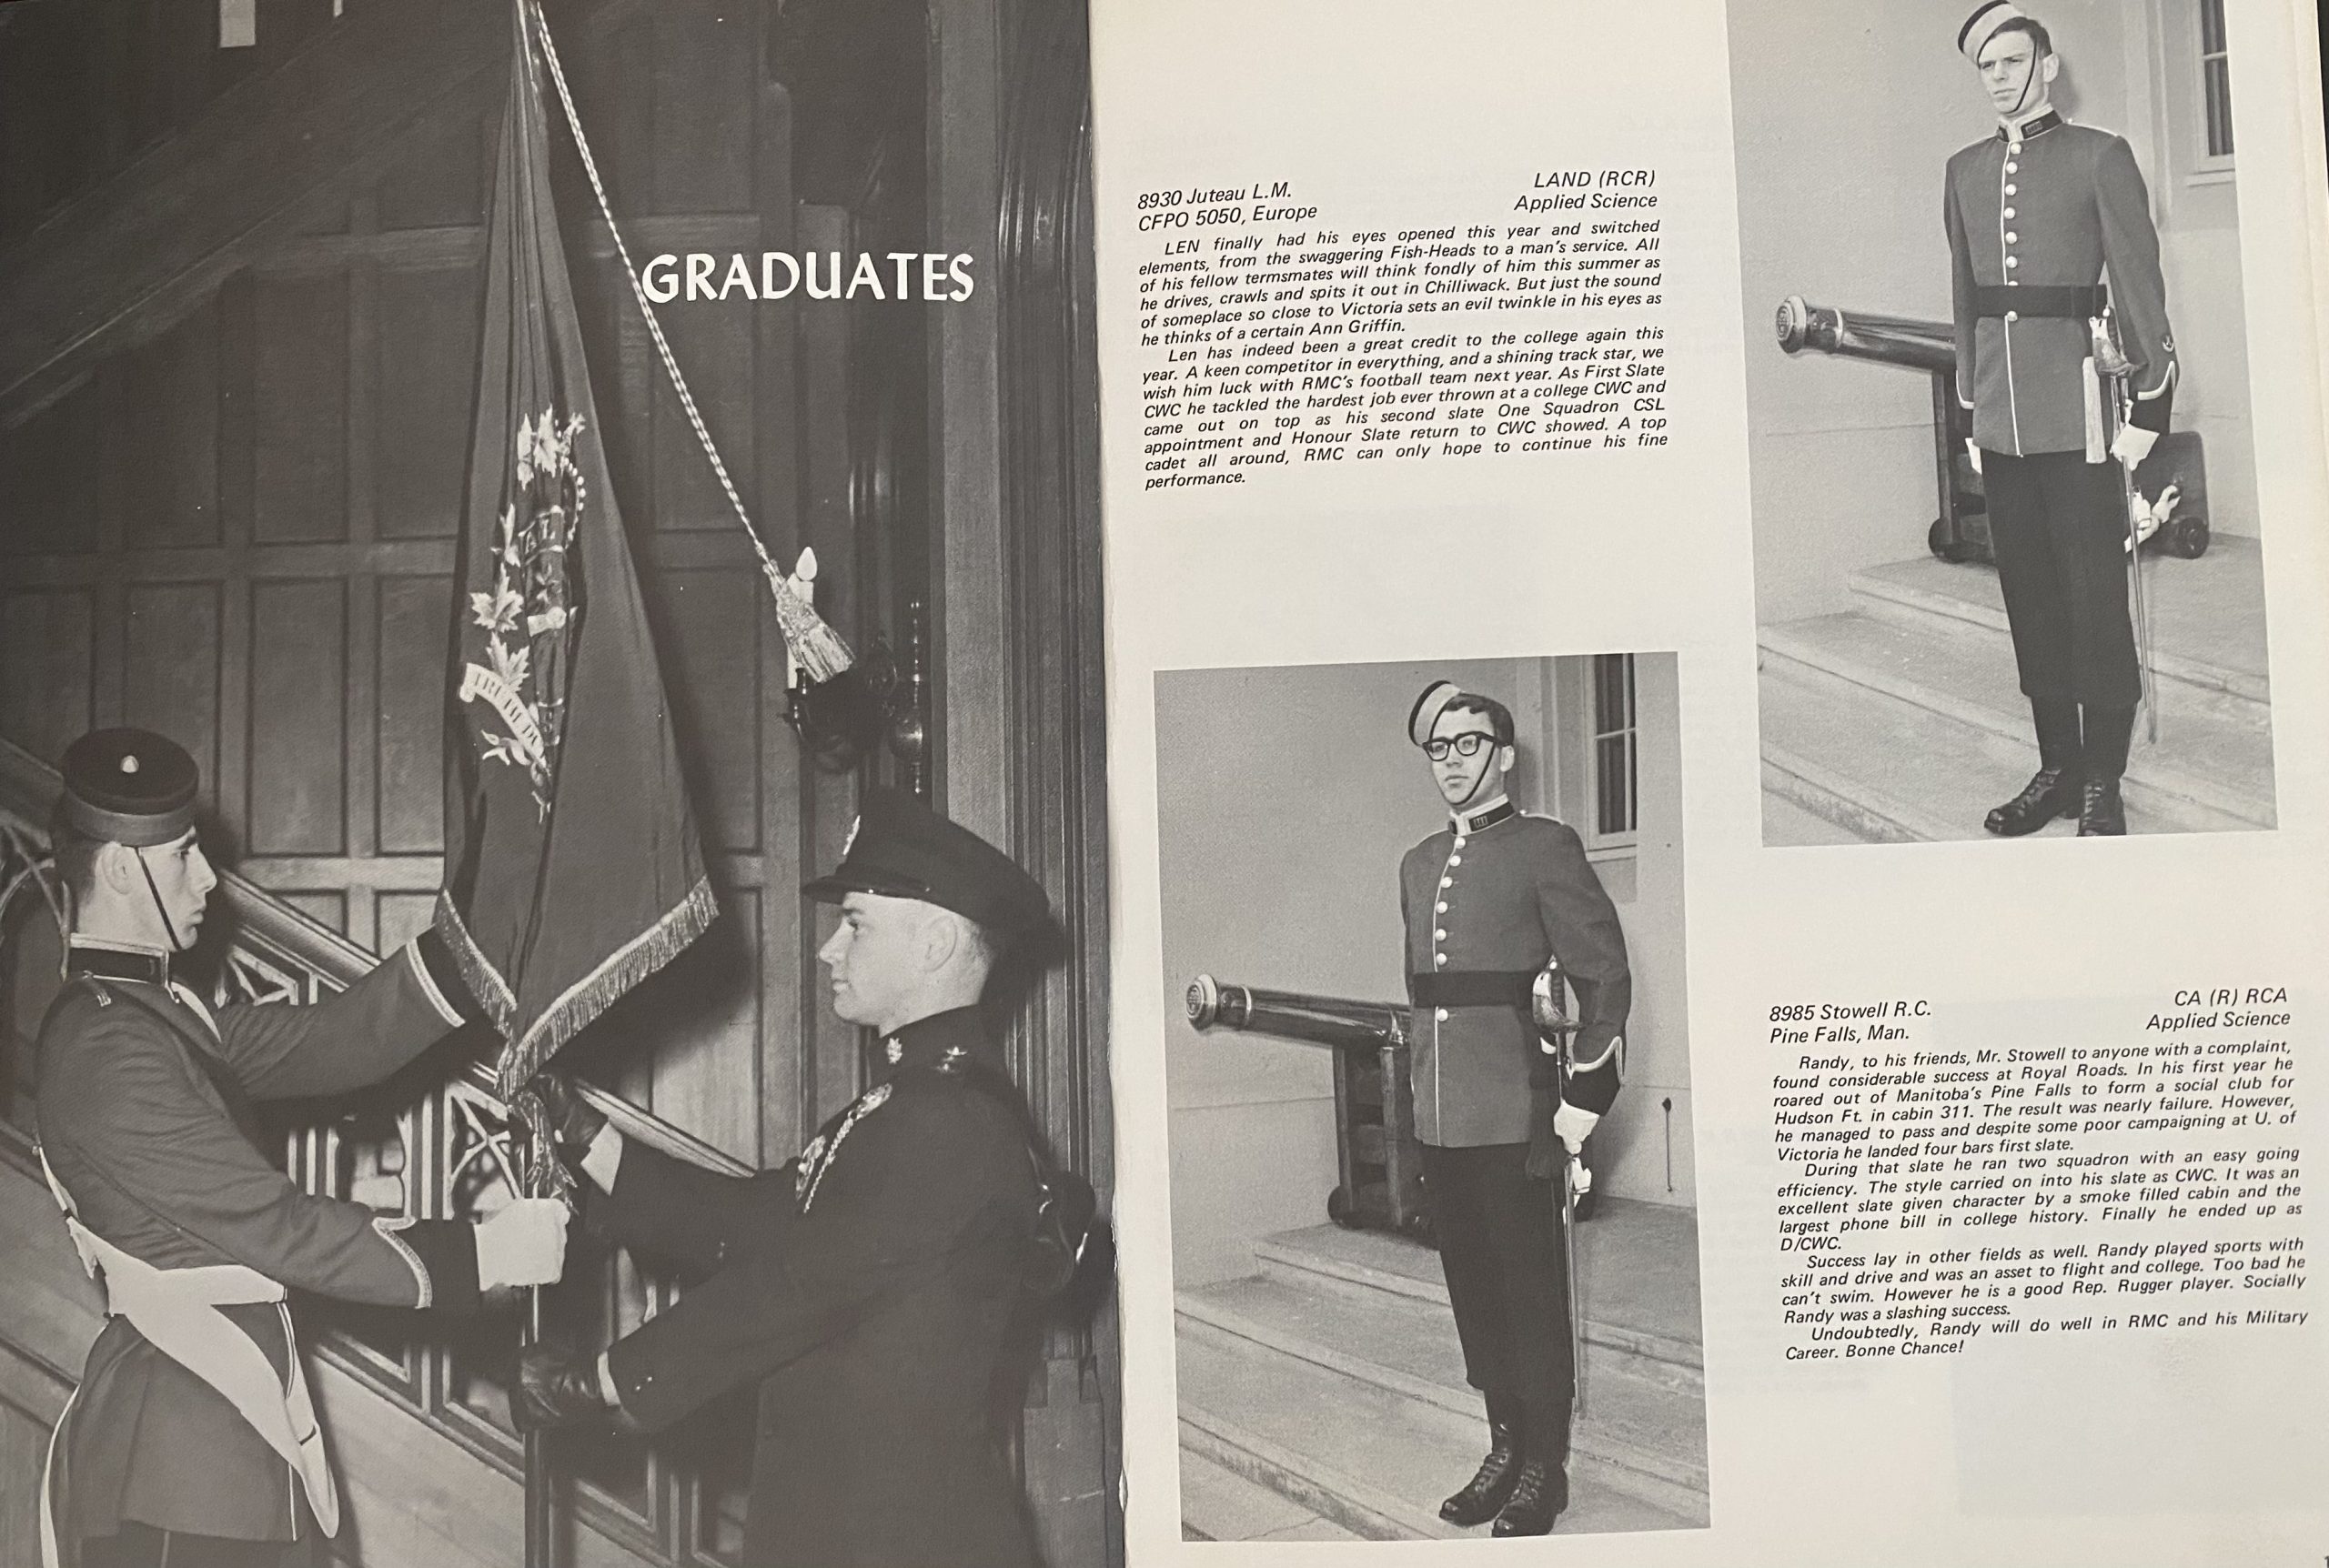 black and white images of graduates from the Royal Road Military College in 1969